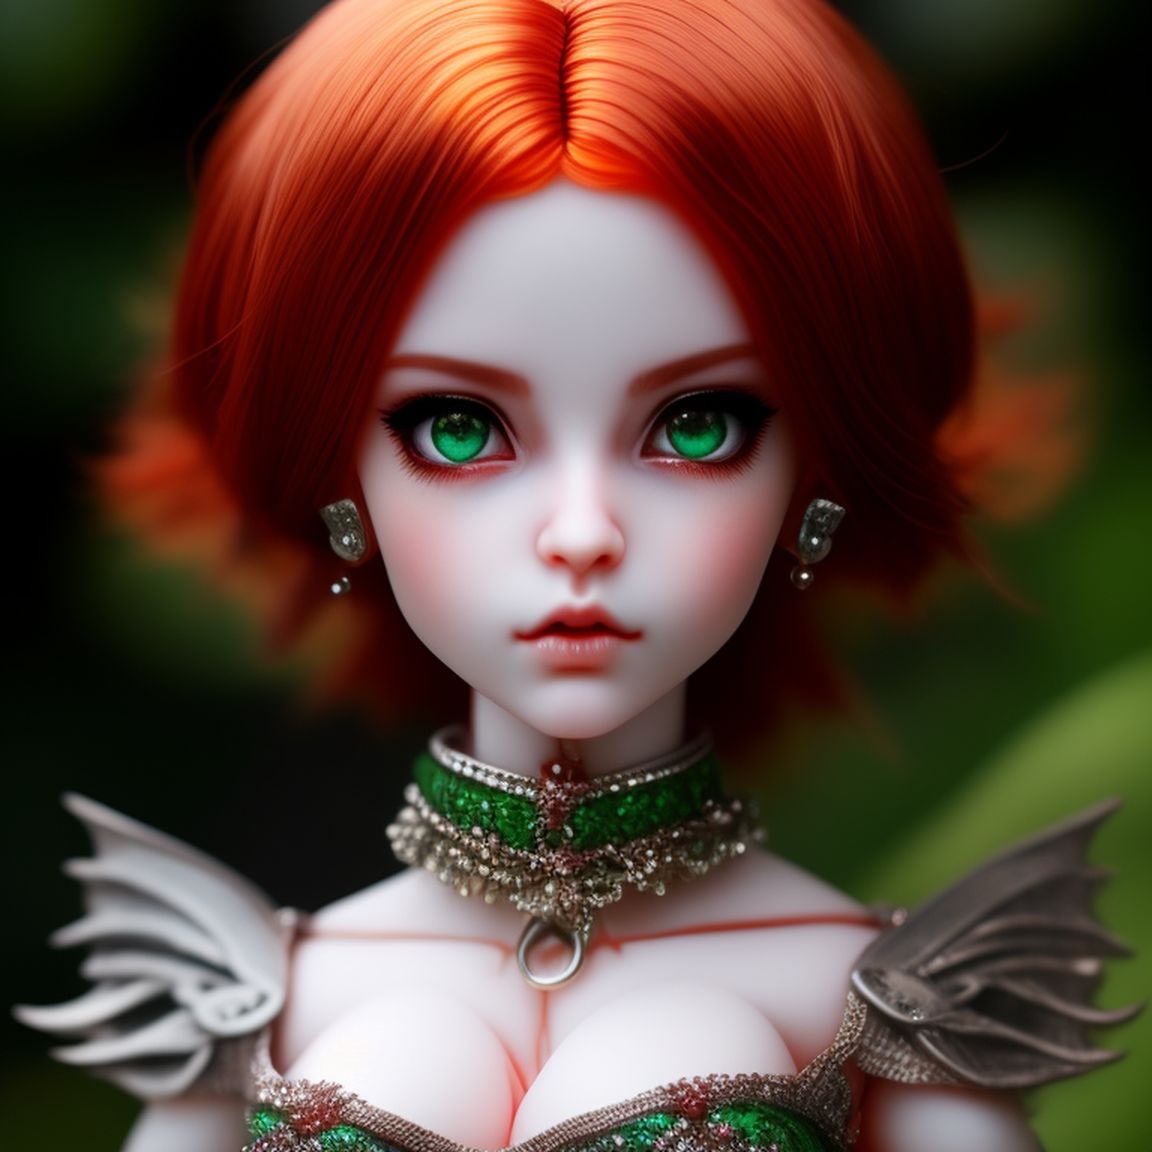 modern makeup doll face portrait toy red hair girl lying in green